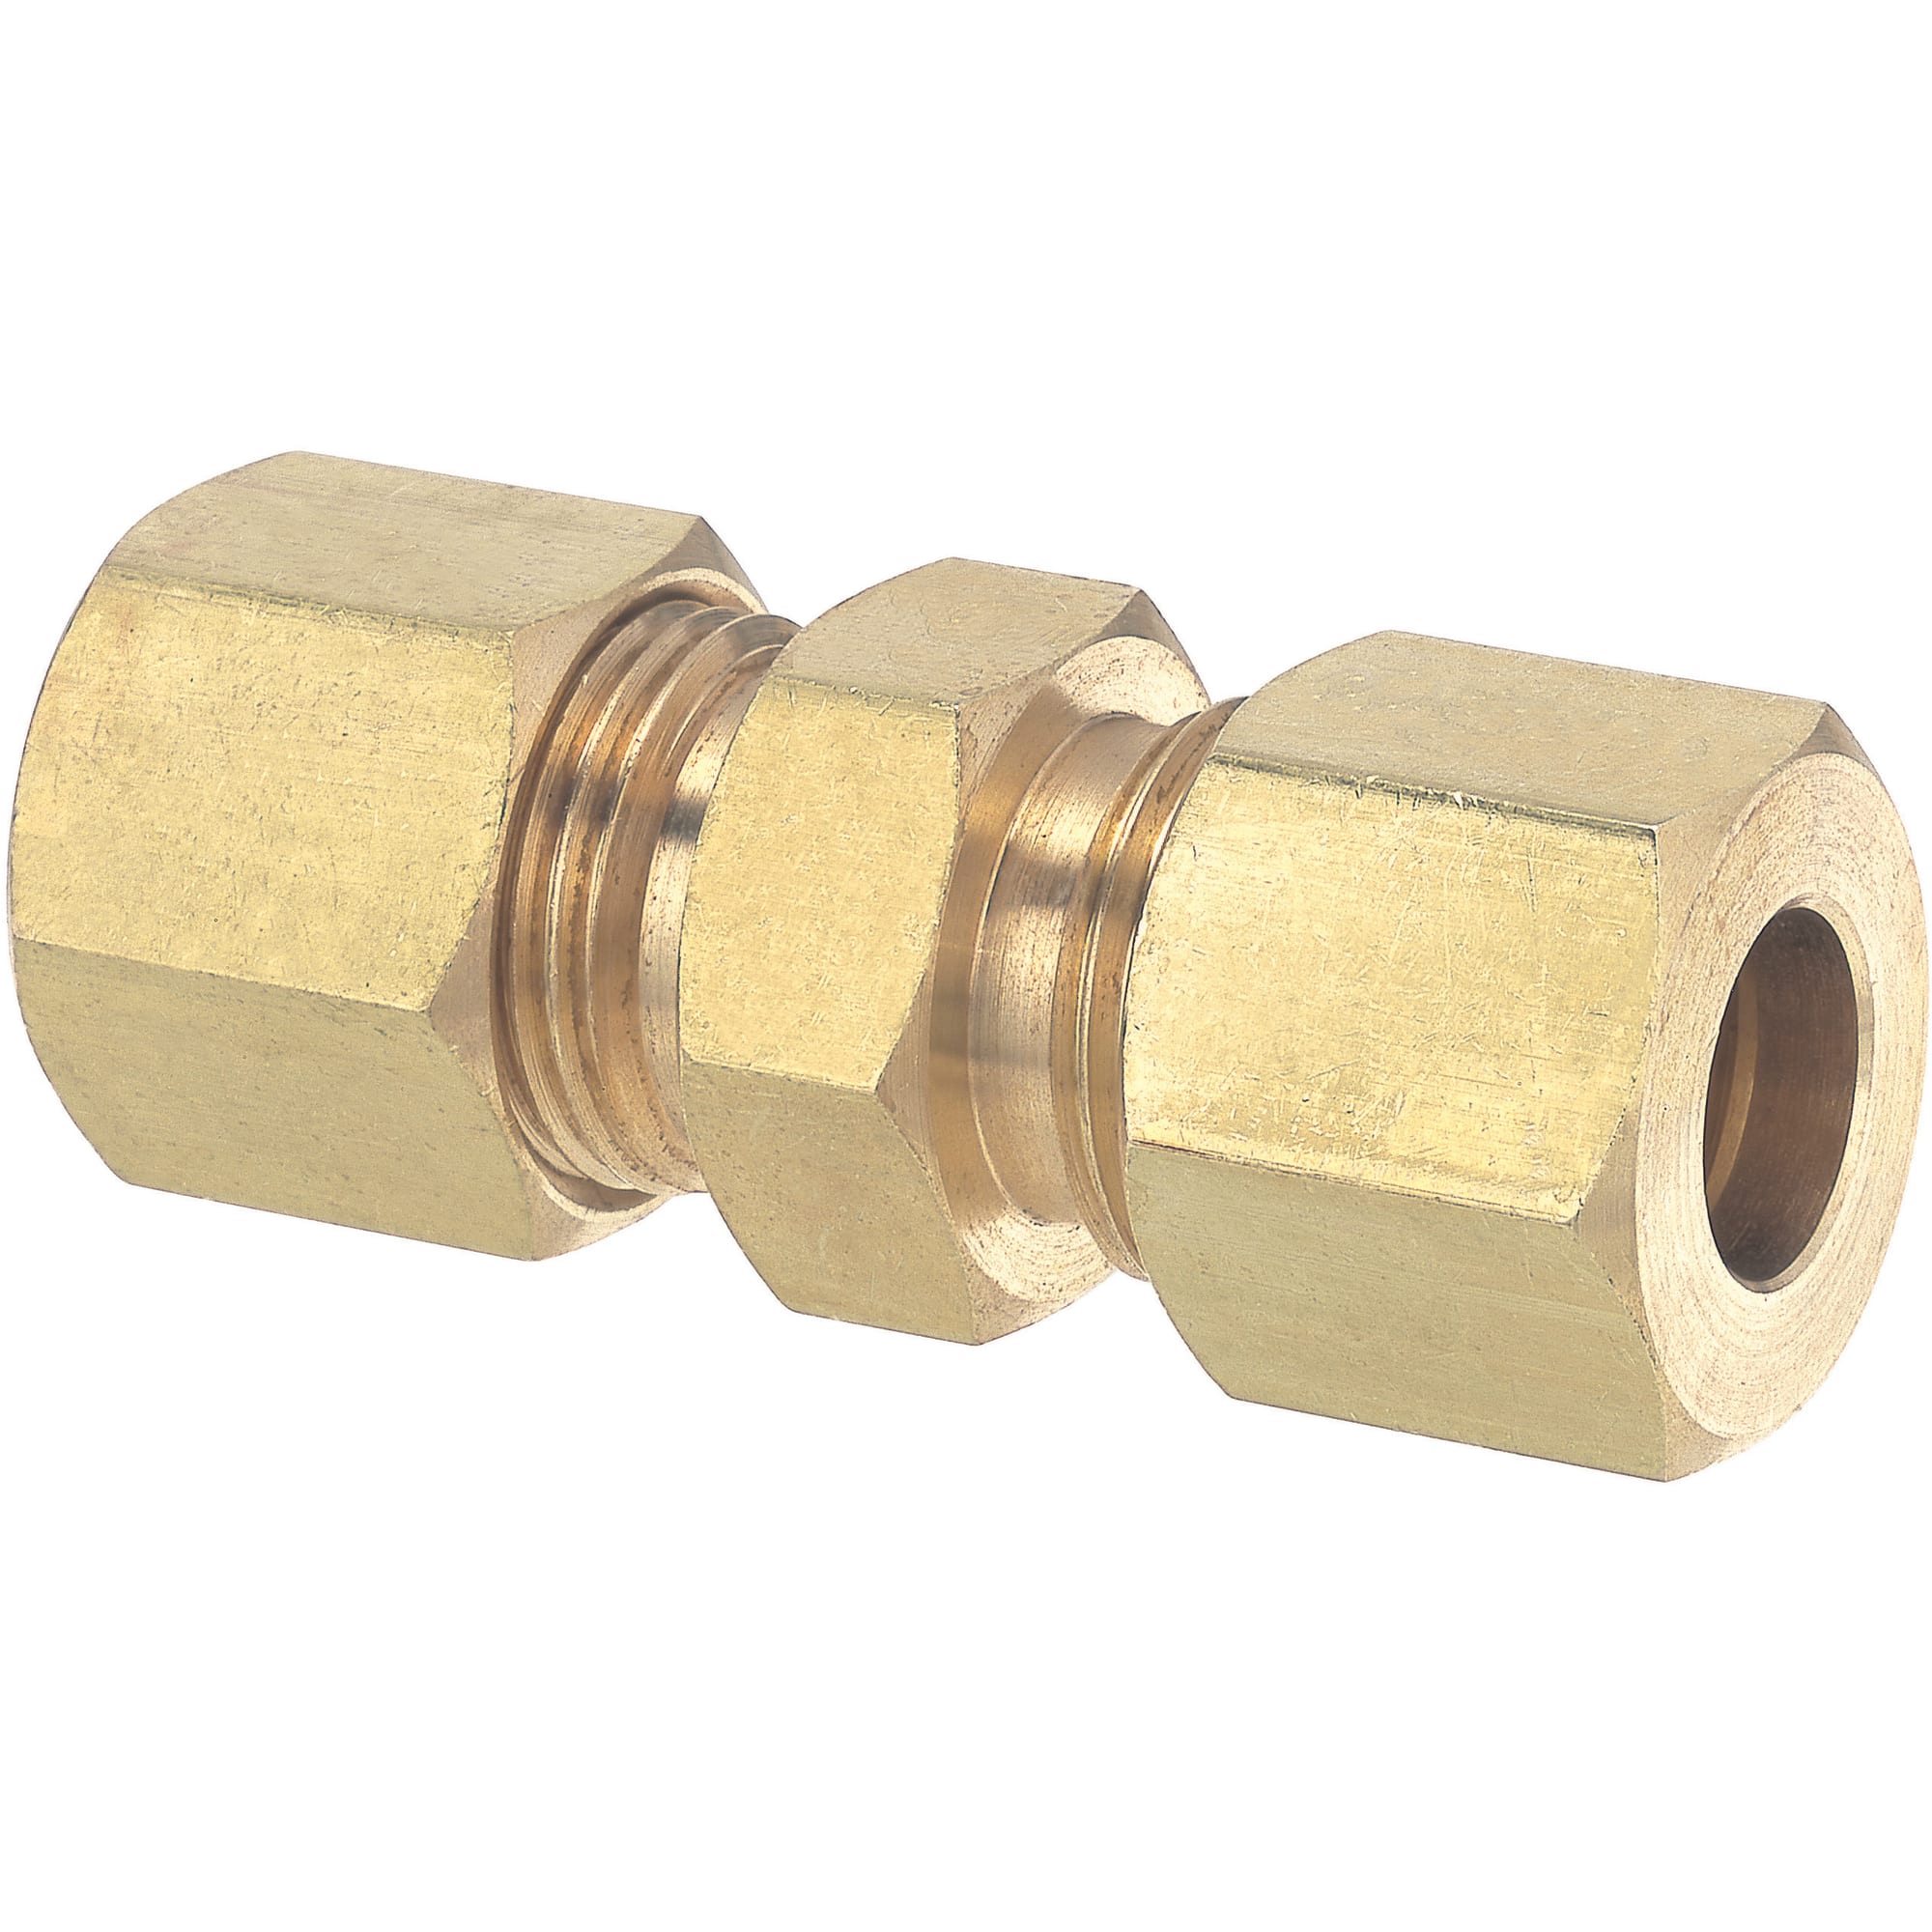 Copper Pipe Fittings - Union